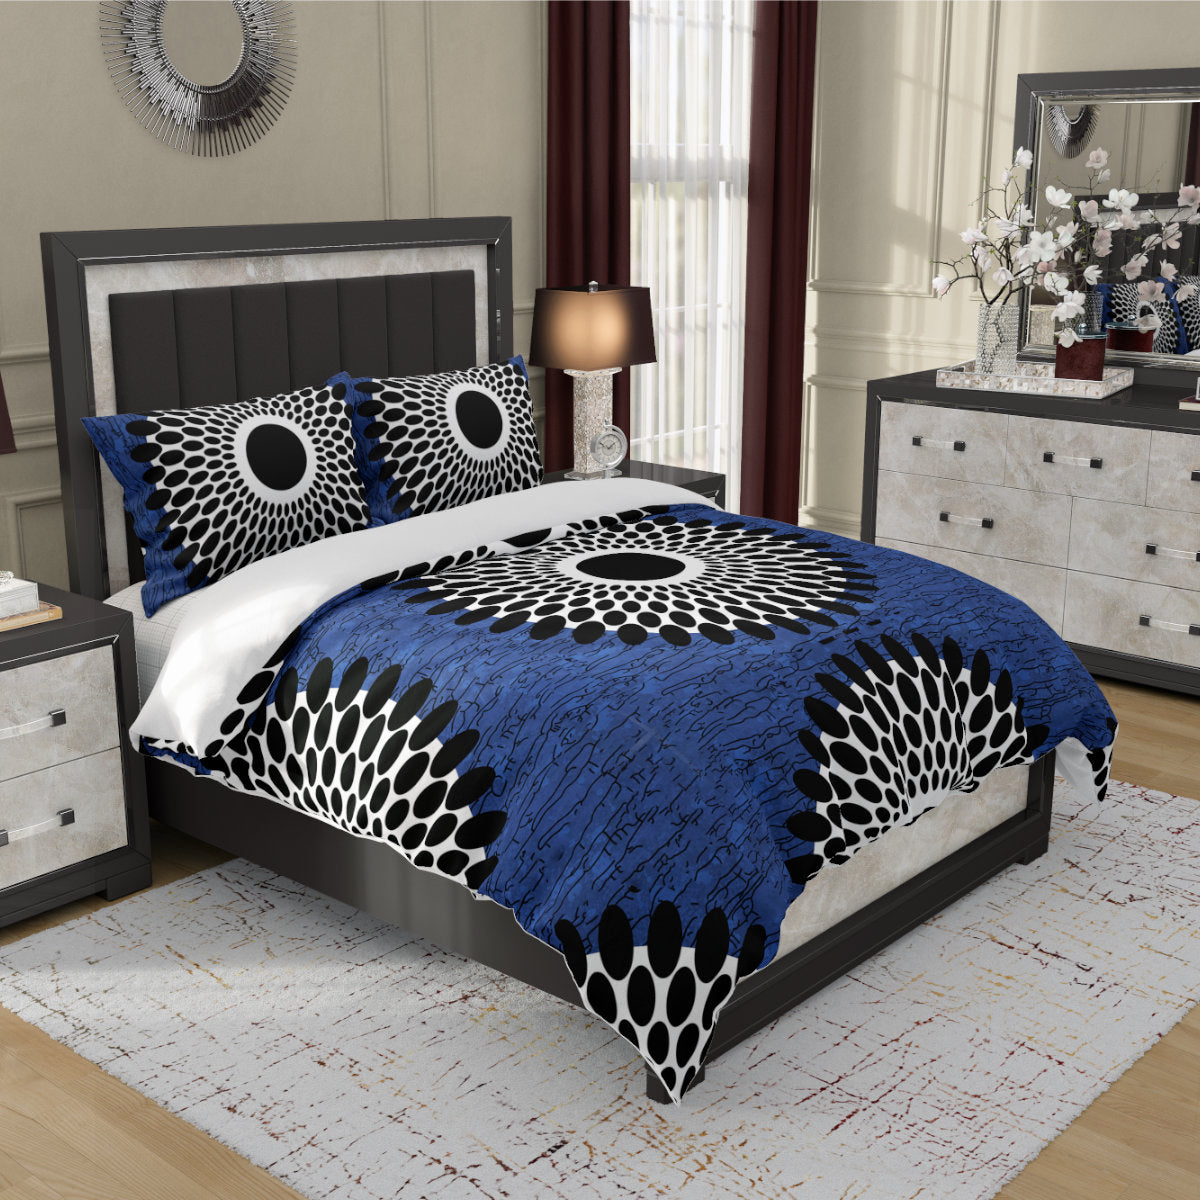 African Print Duvet Cover and Pillow Case Set - Blue,  Black, and White